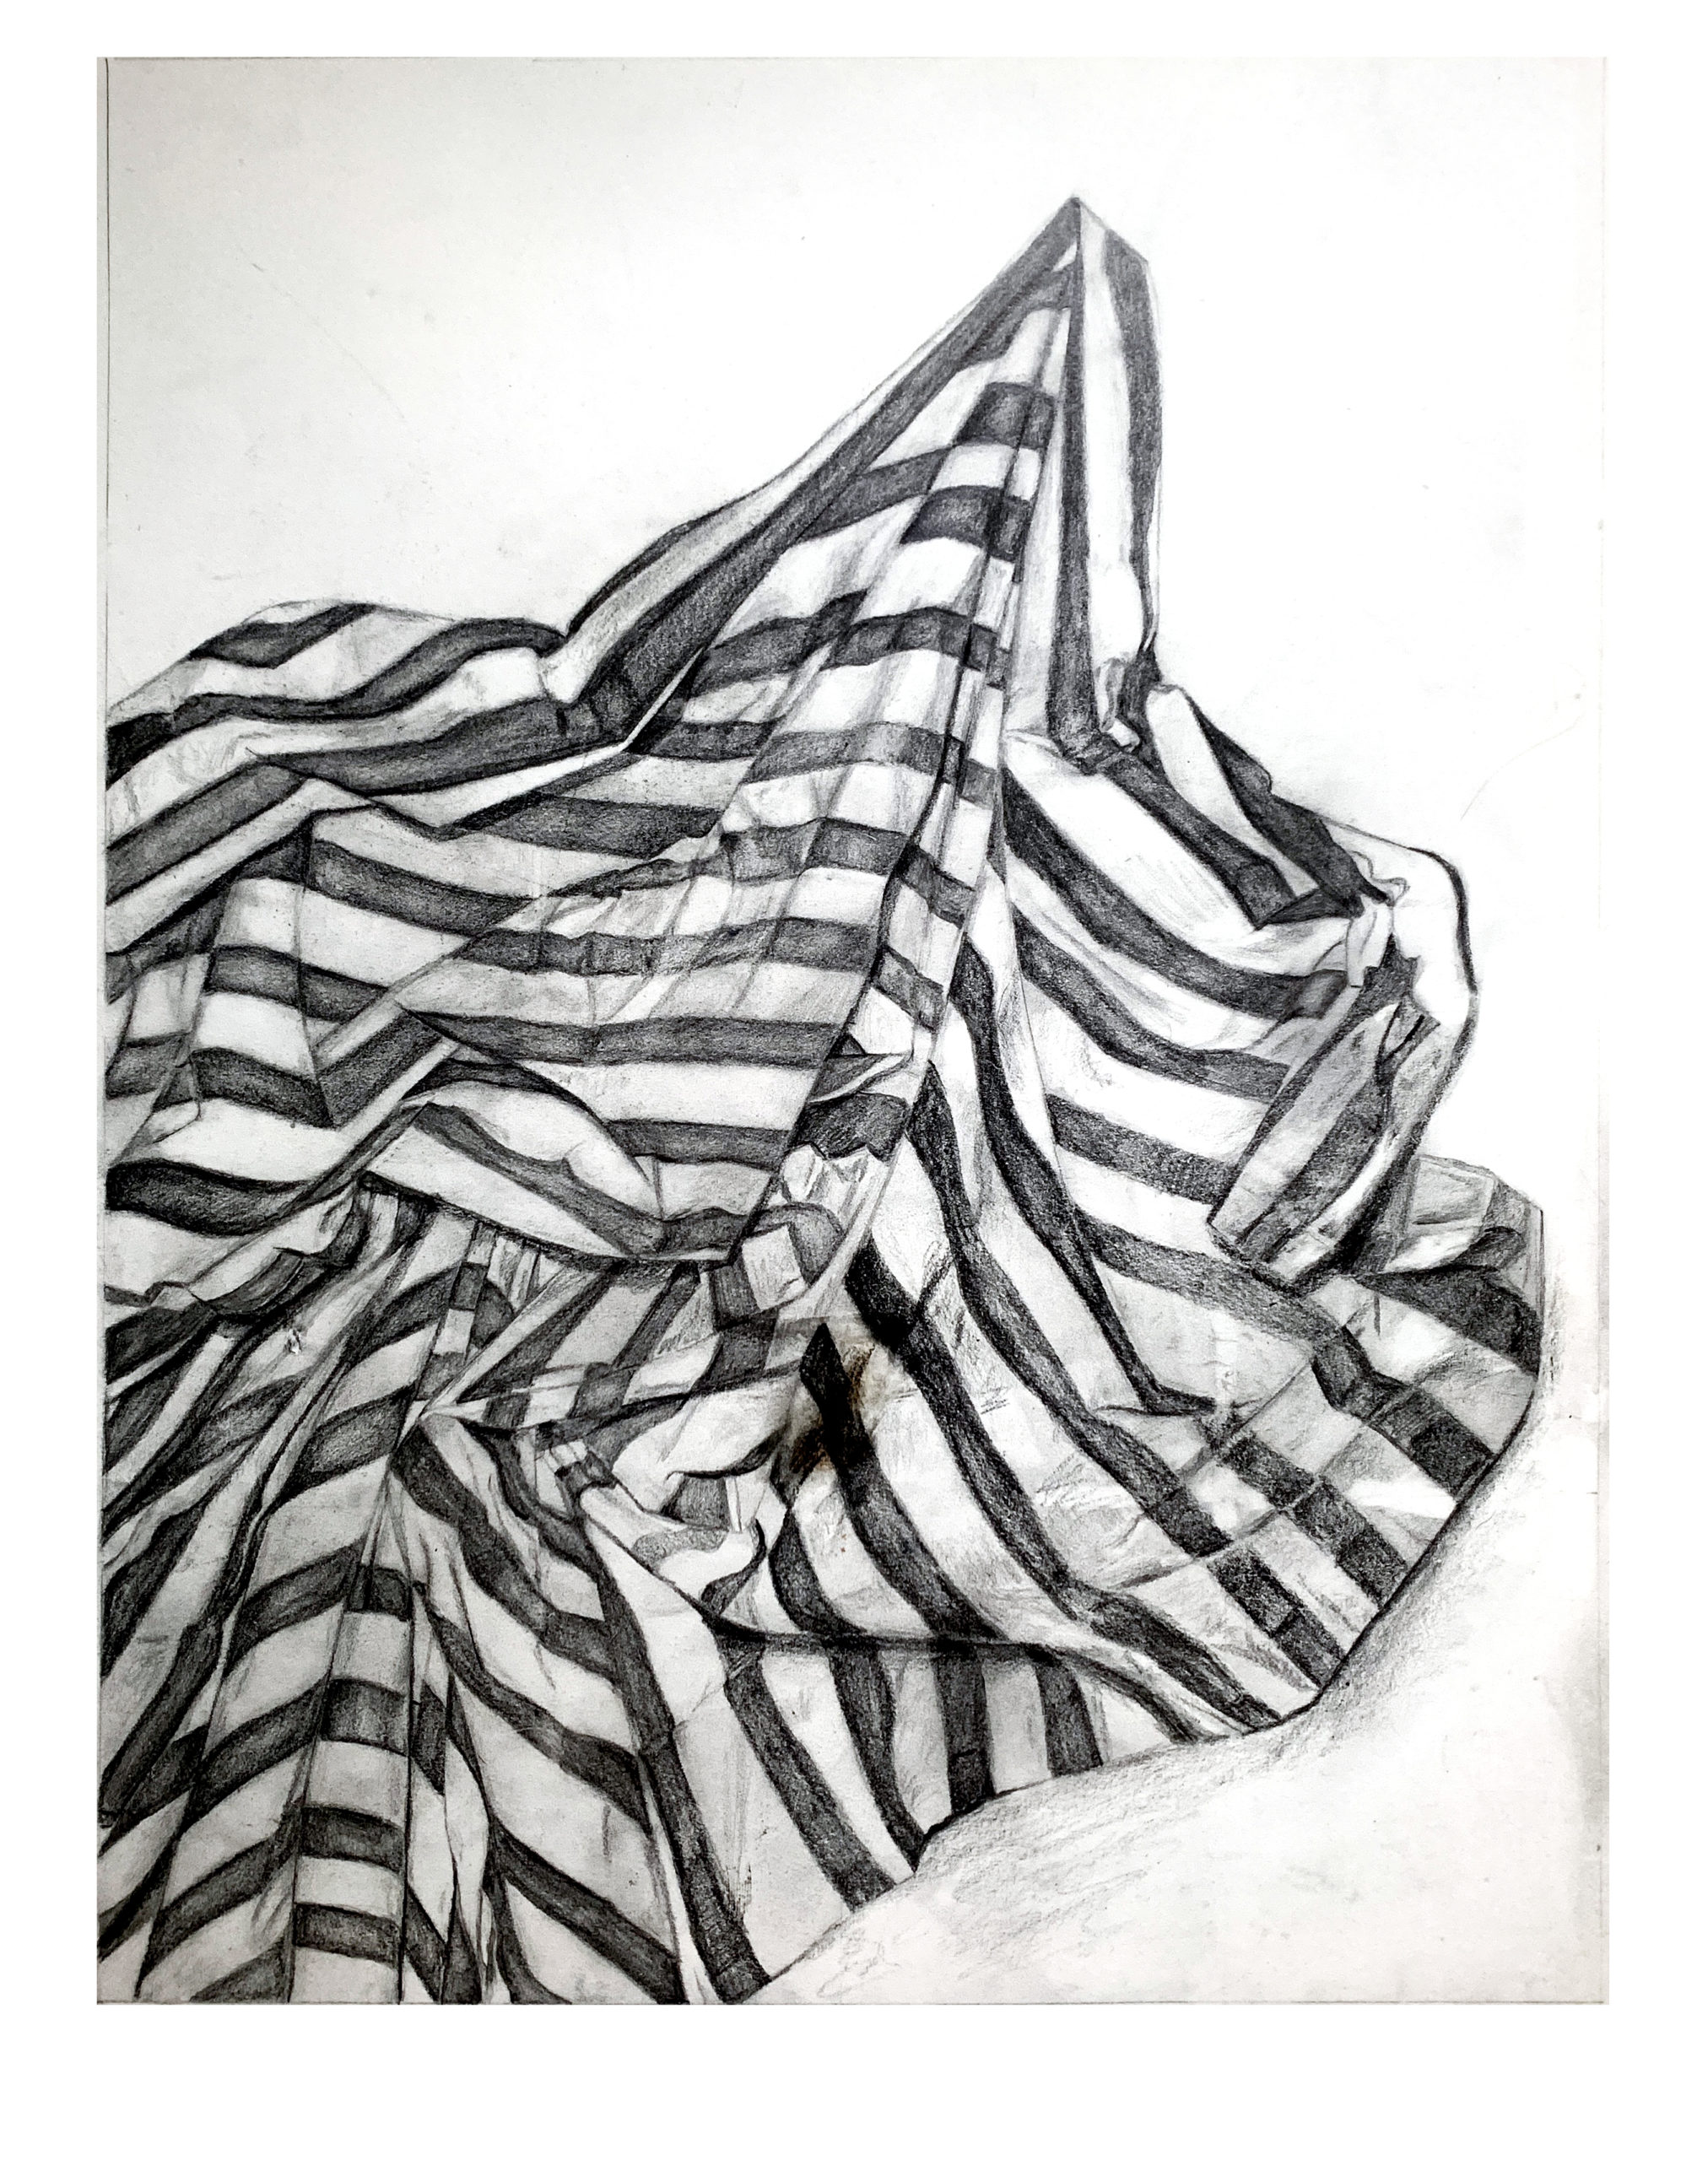 Alexa Holder, Graphite on Paper, 30″x22″, Striped Fabric Value/Closure Drawing, AR100 Drawing I, Spring 2020